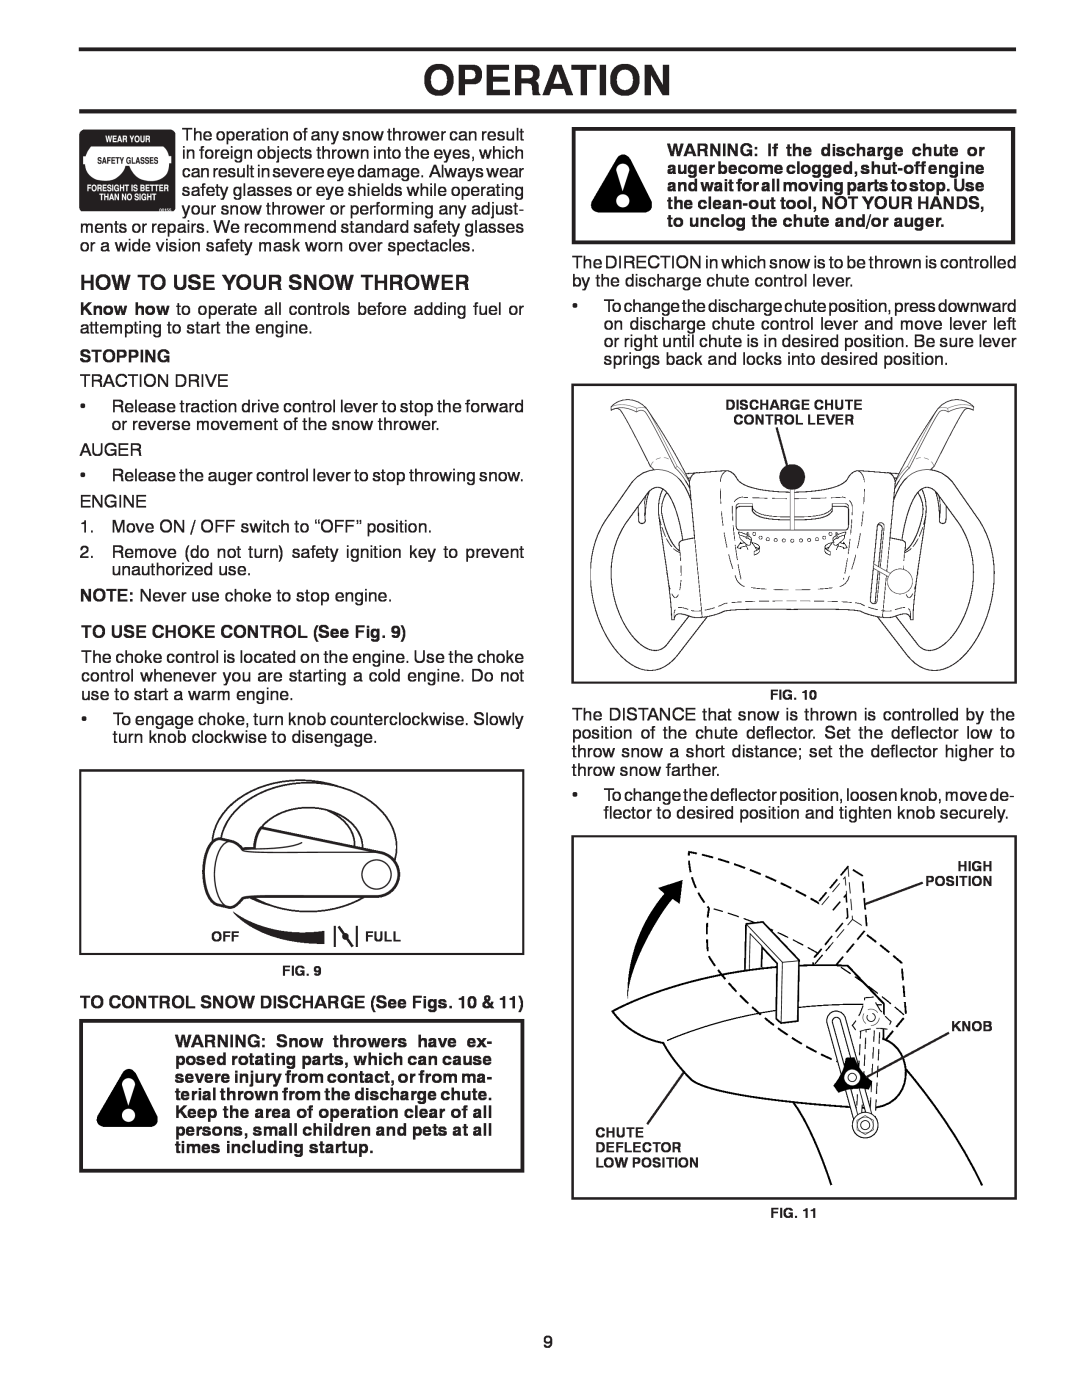 Poulan 96192003302, 430355 owner manual How To Use Your Snow Thrower, Operation, Stopping, TO USE CHOKE CONTROL See Fig 